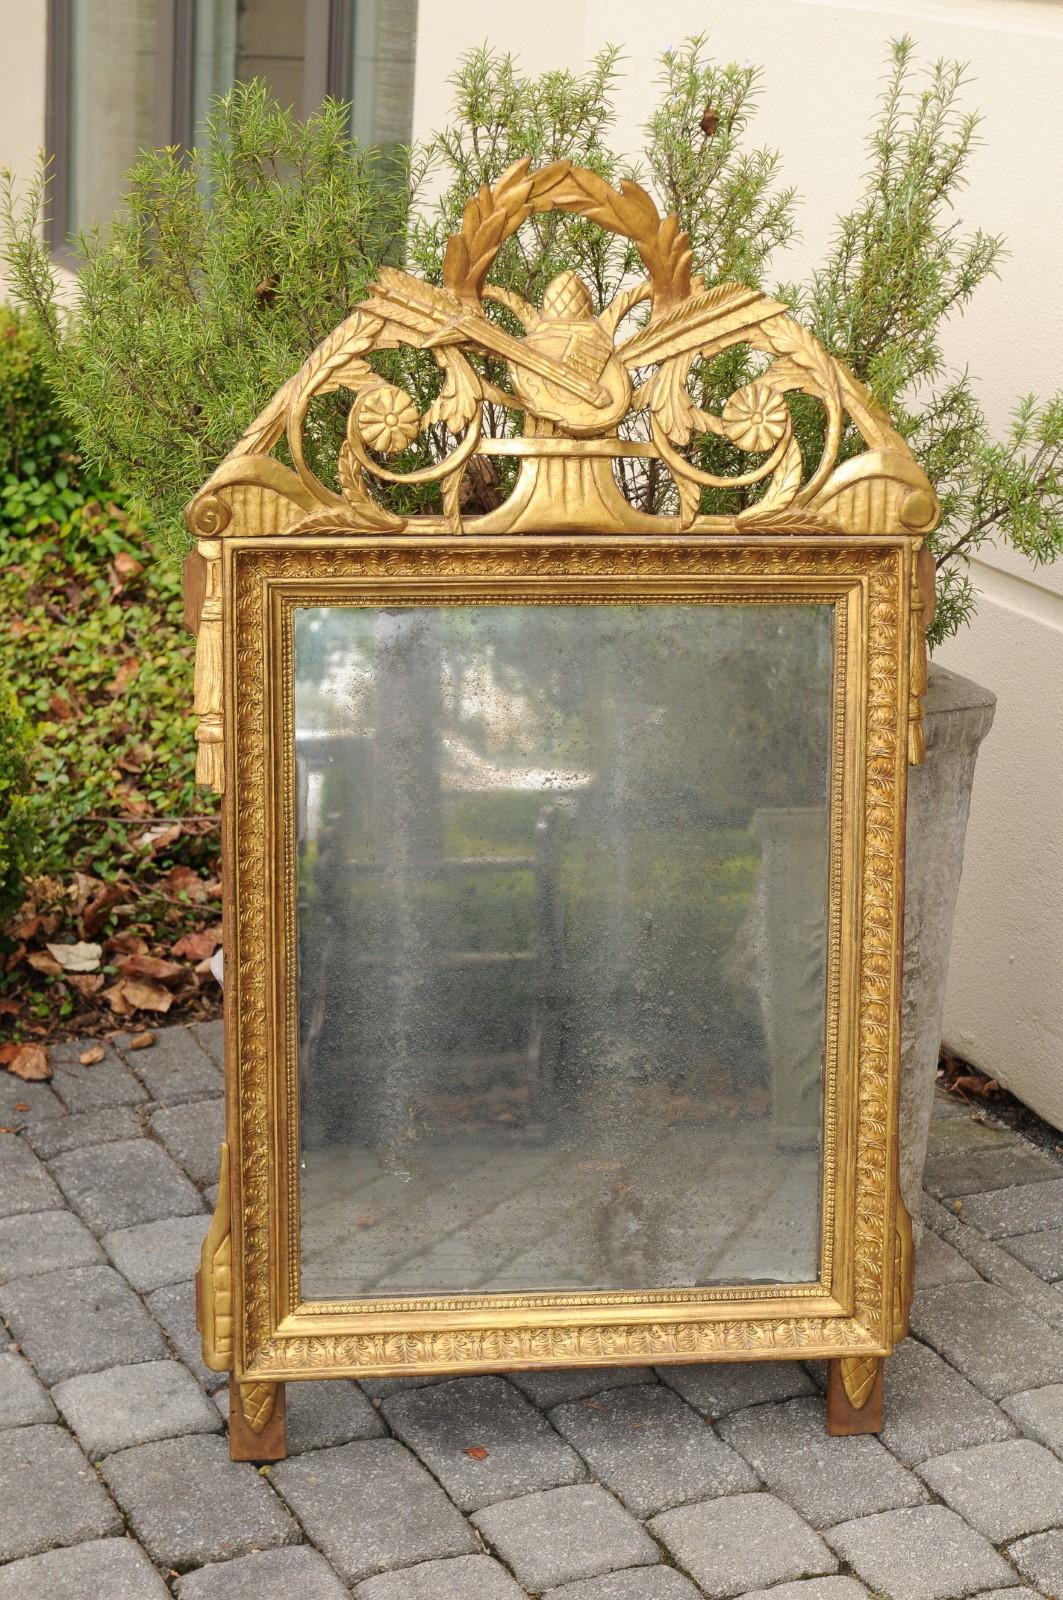 This French carved Louis XVI period late 18th century giltwood mirror features an exquisite pierced and carved crest made of various motifs such as a lute, acorn, arrows, flowers, a laurel wreath and volutes symbolizing the Liberal Arts. The